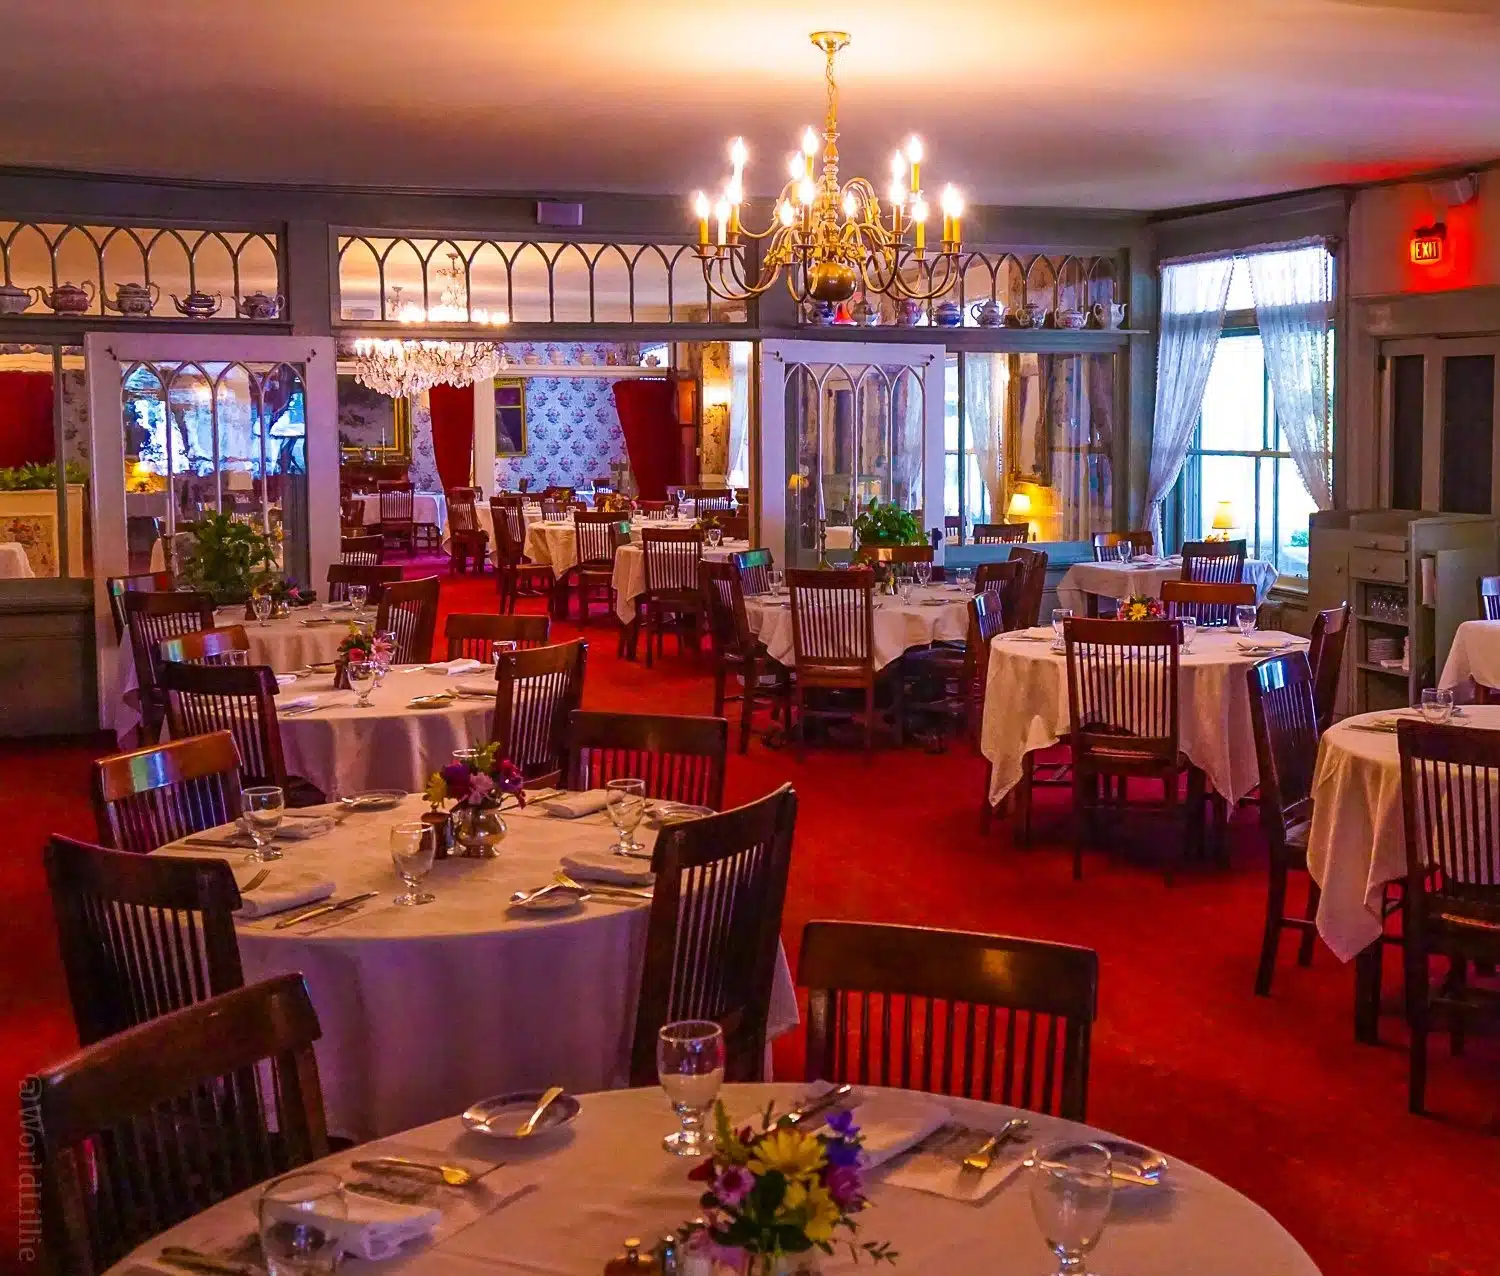 Red carpet in the Main Dining Room of the Red Lion Inn, Stockbridge, MA with chandeliers!